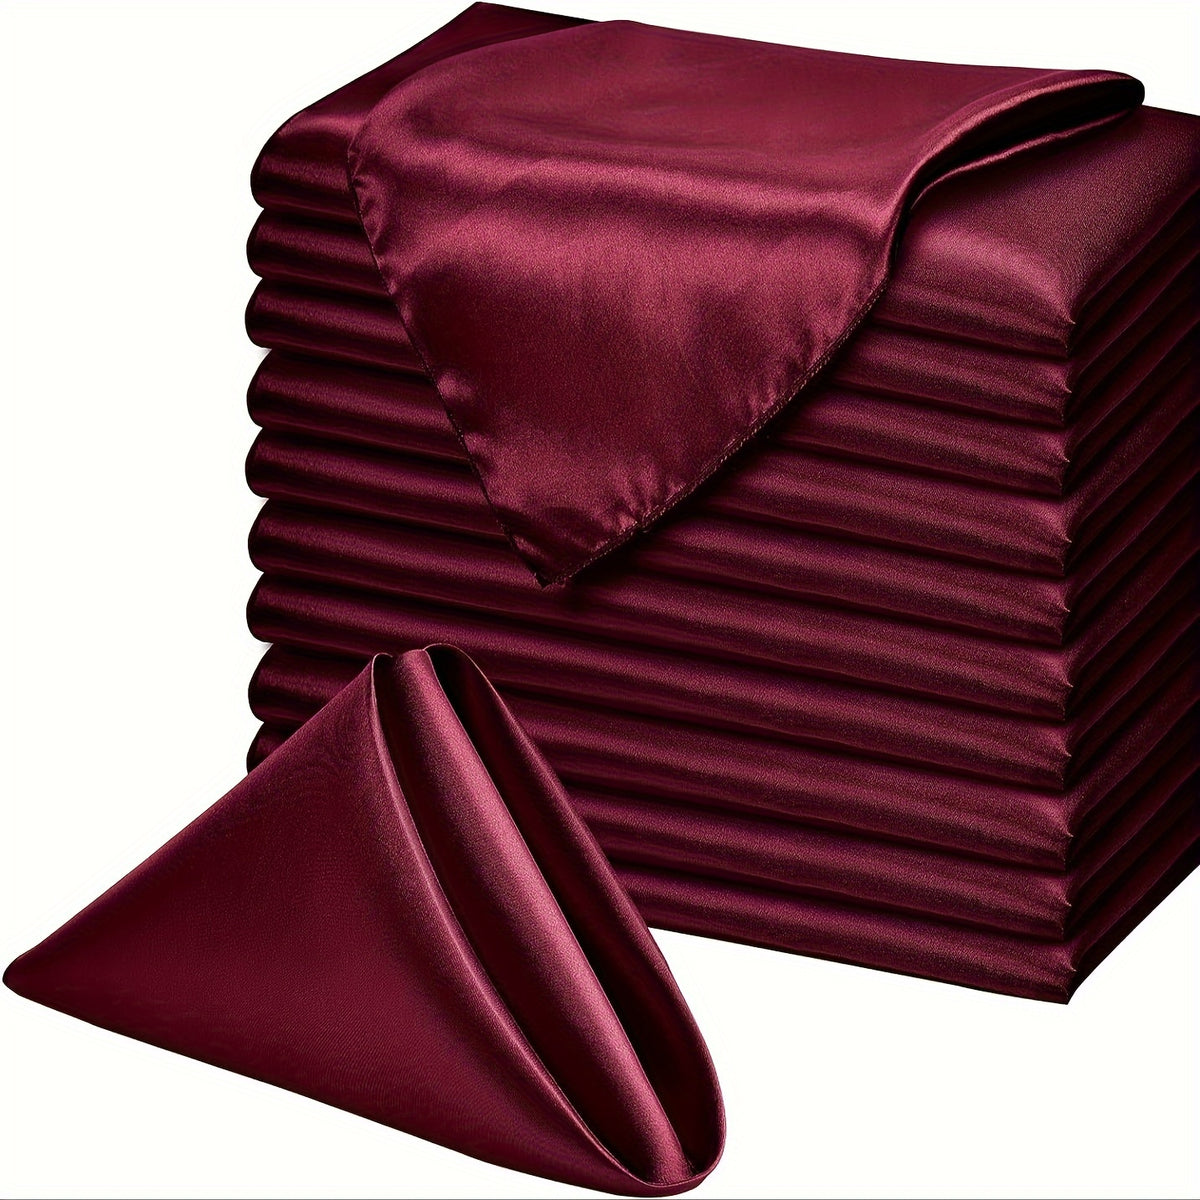 a stack of folded sheets and a satin pillow